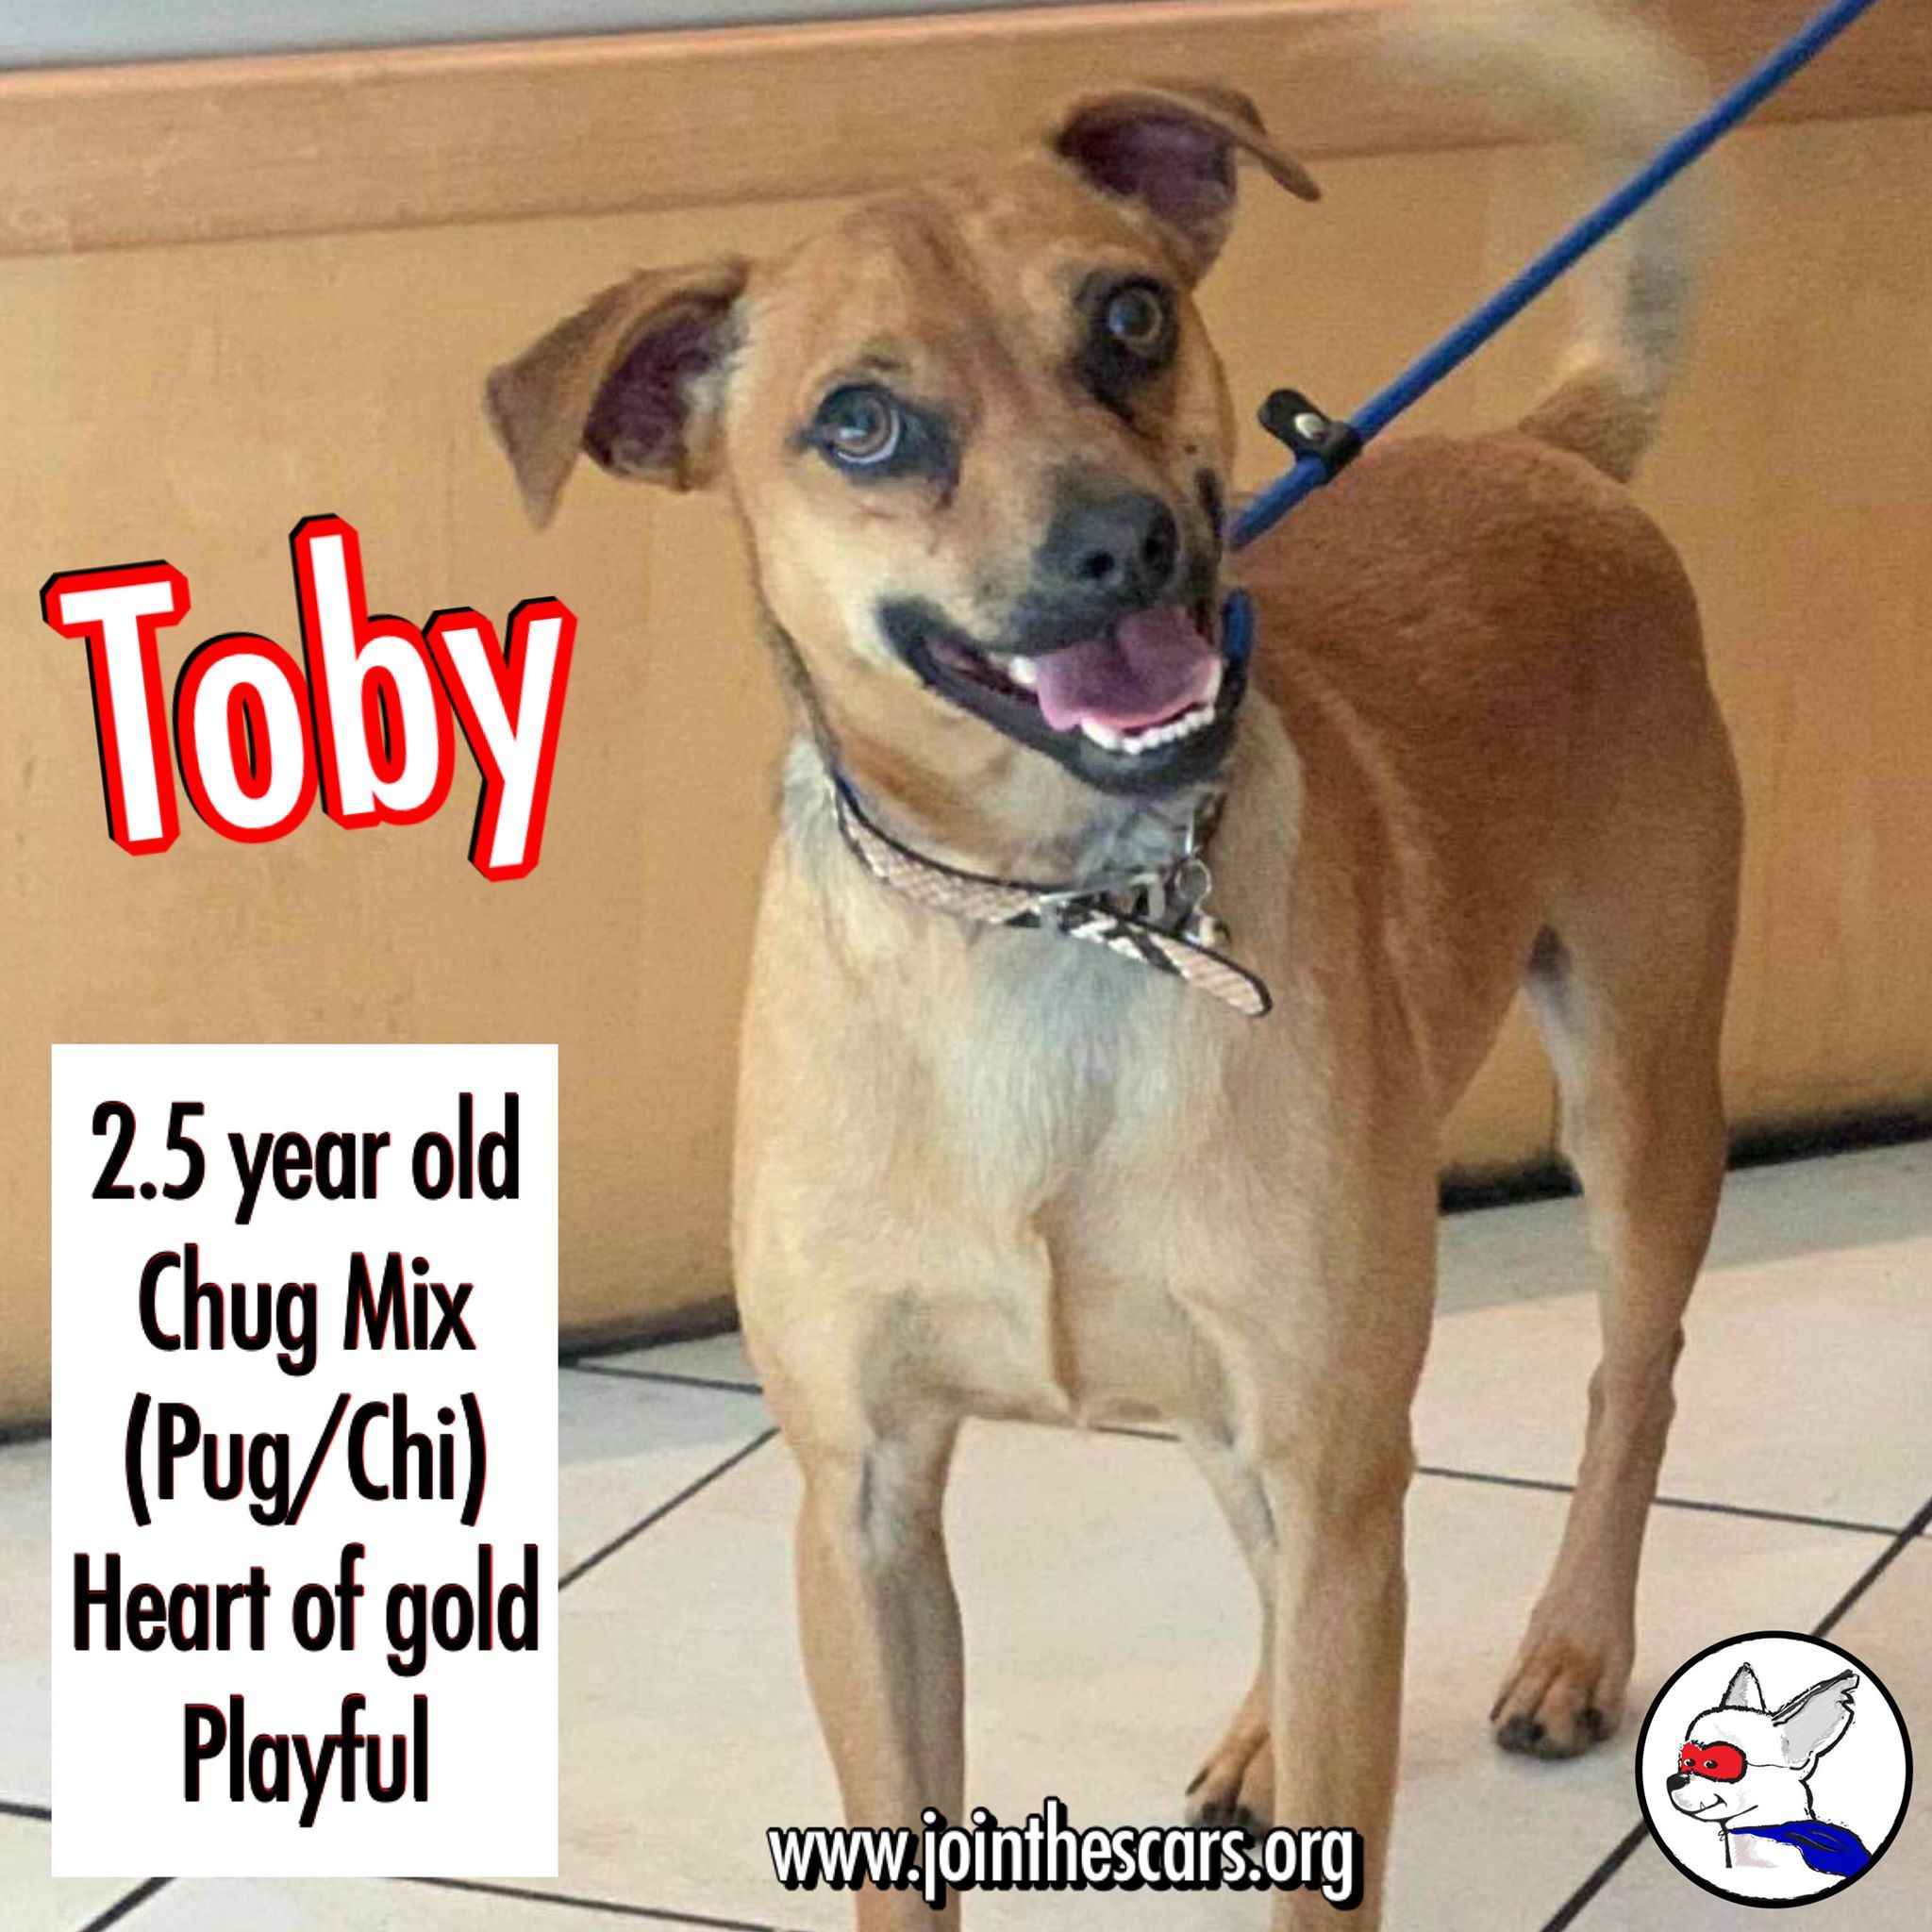 Toby detail page